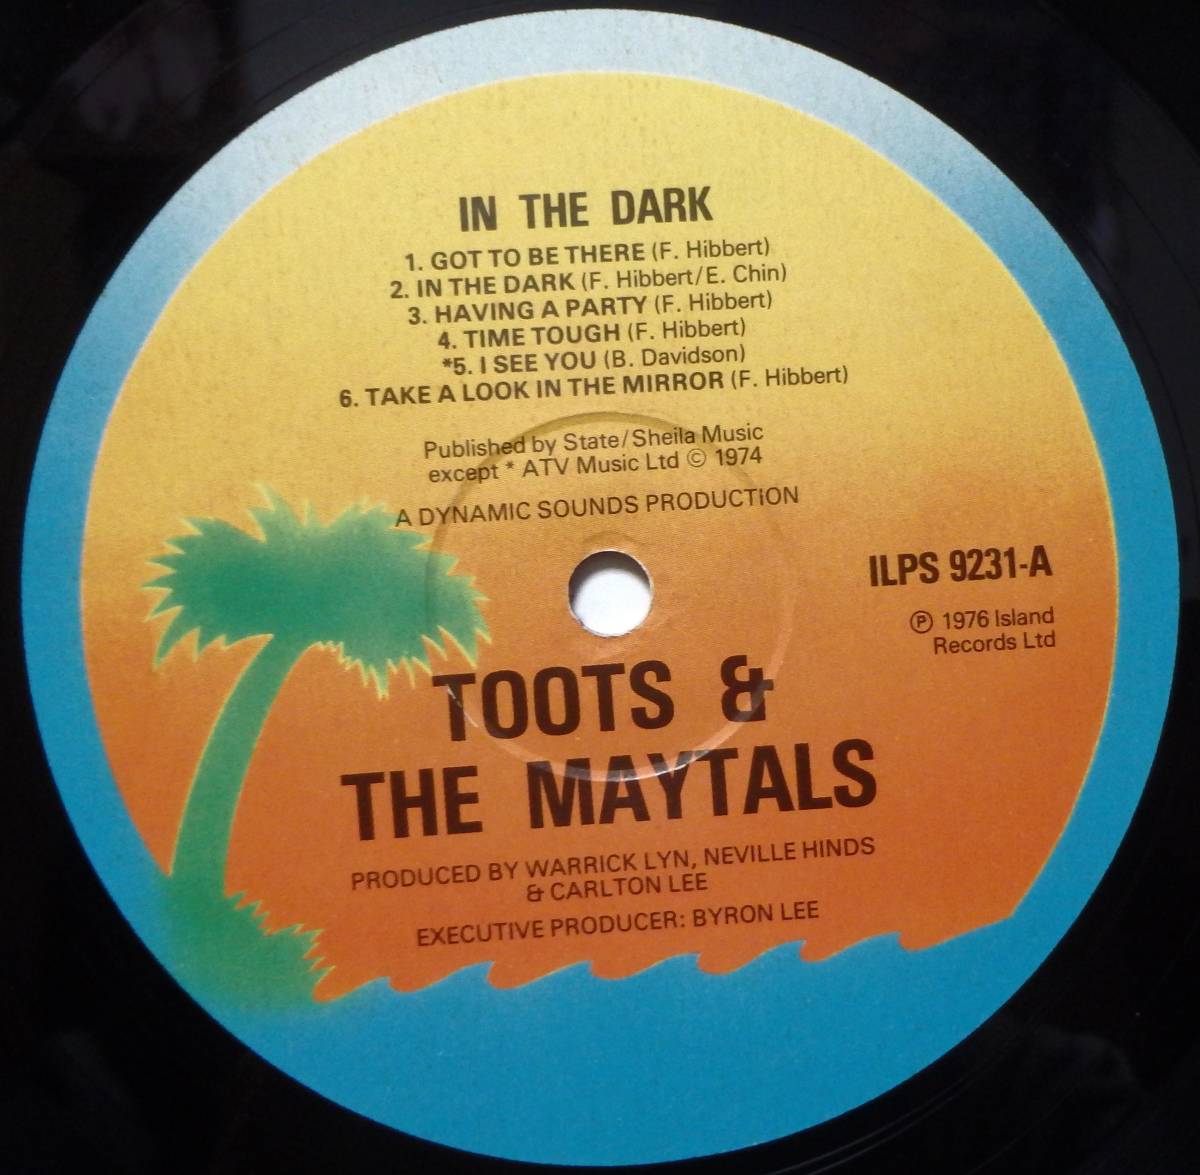 【RG037】TOOTS & THE MAYTALS 「In The Dark」, 76 UK Reissue　★ルーツ・レゲエ/レゲエ_画像4